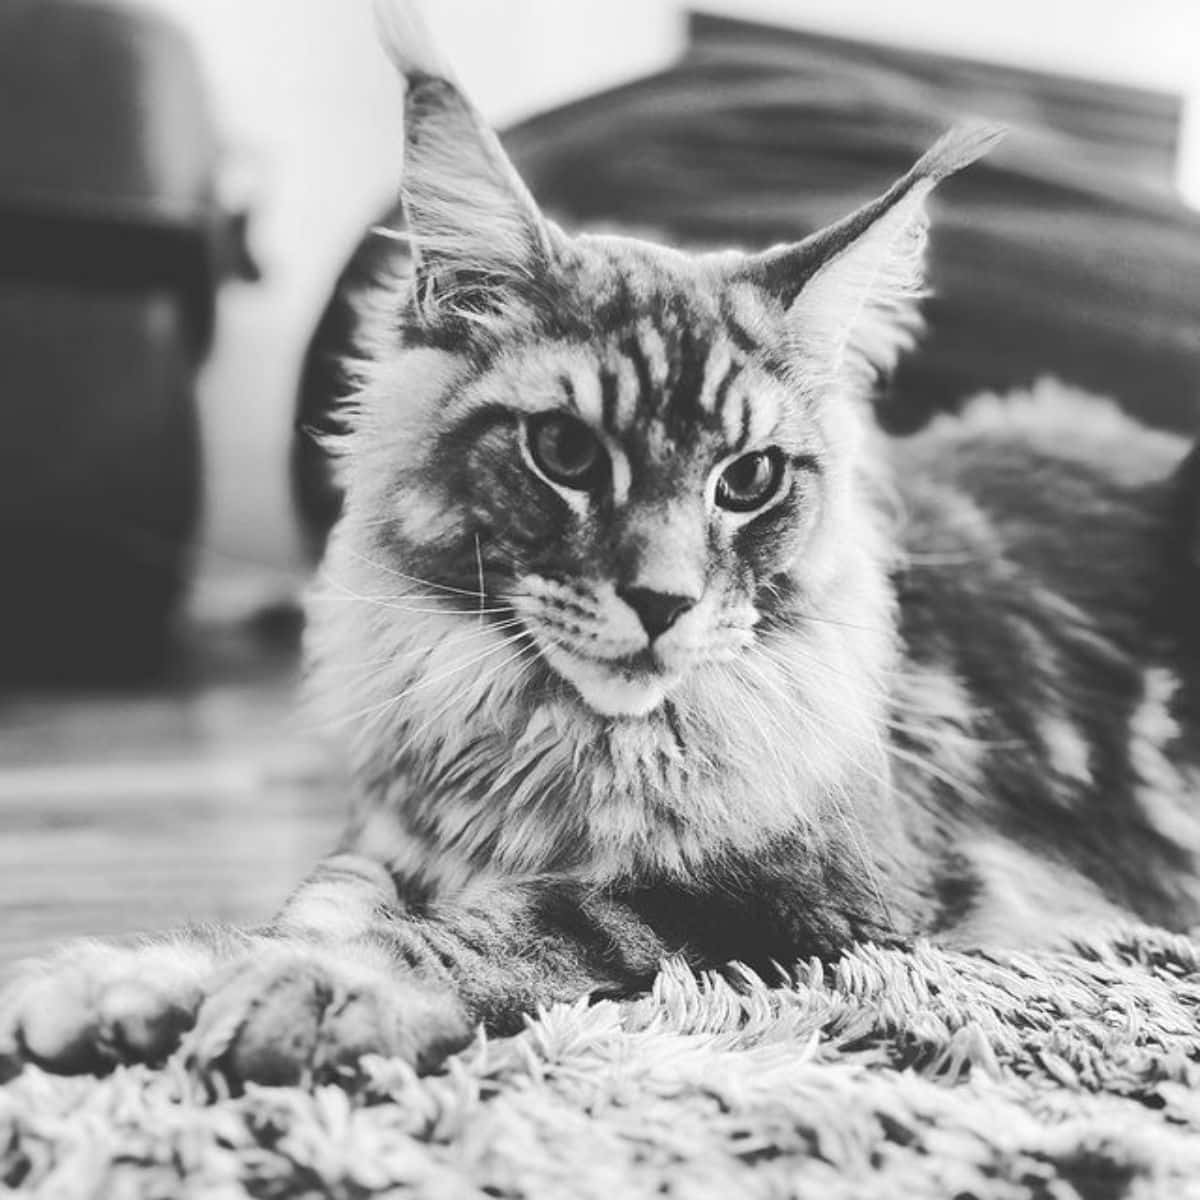 A black and white photo of a tabby maine coon lying on a floor.